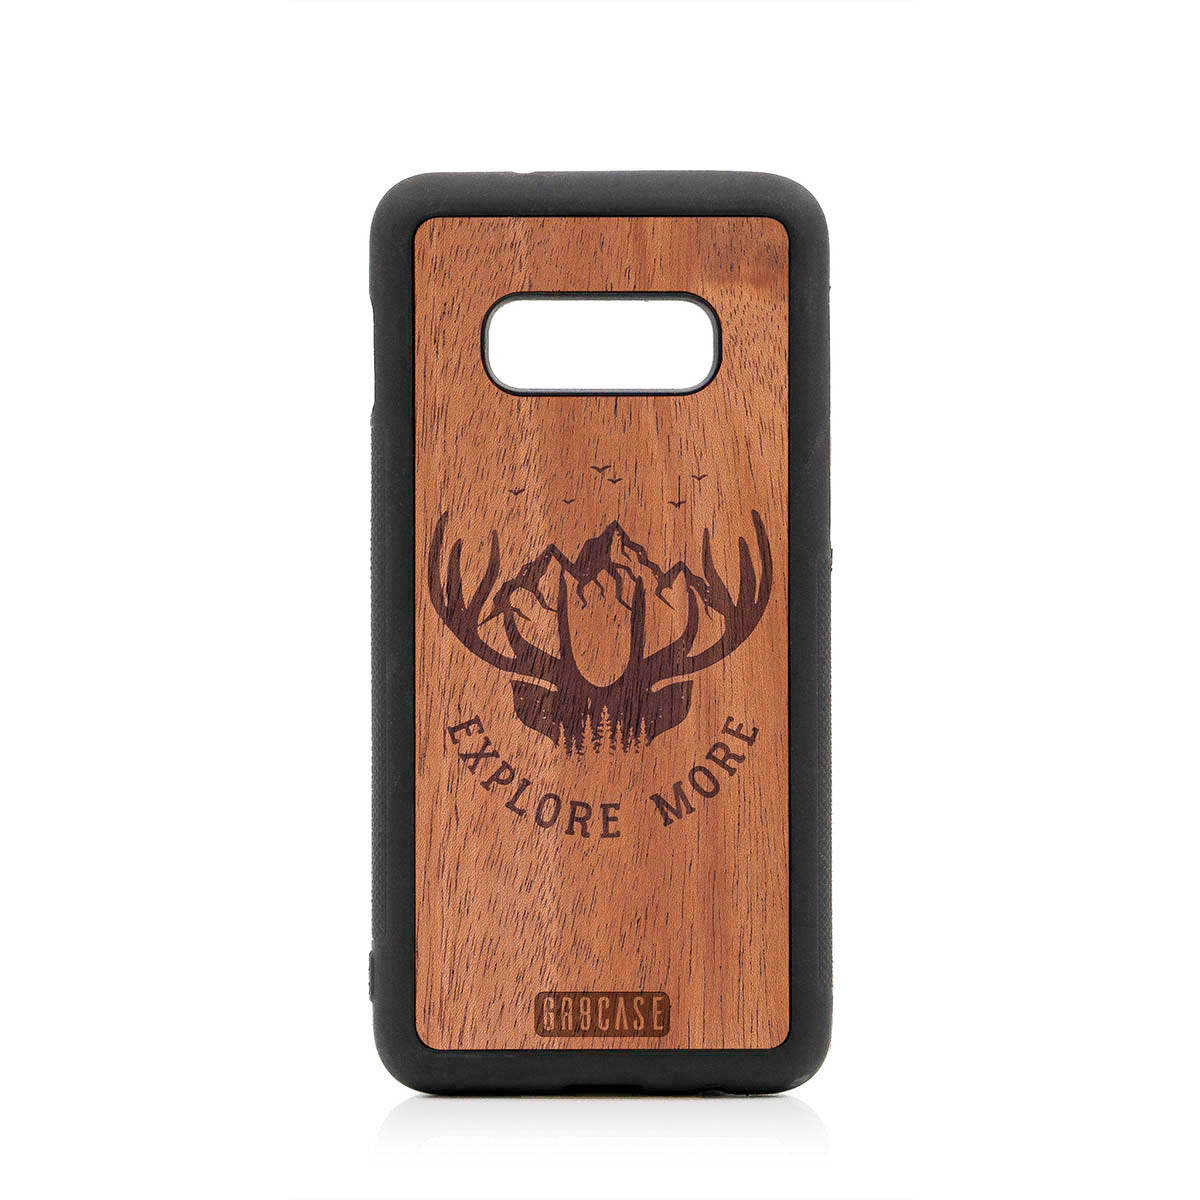 Explore More (Forest, Mountains & Antlers) Design Wood Case For Samsung Galaxy S10E by GR8CASE